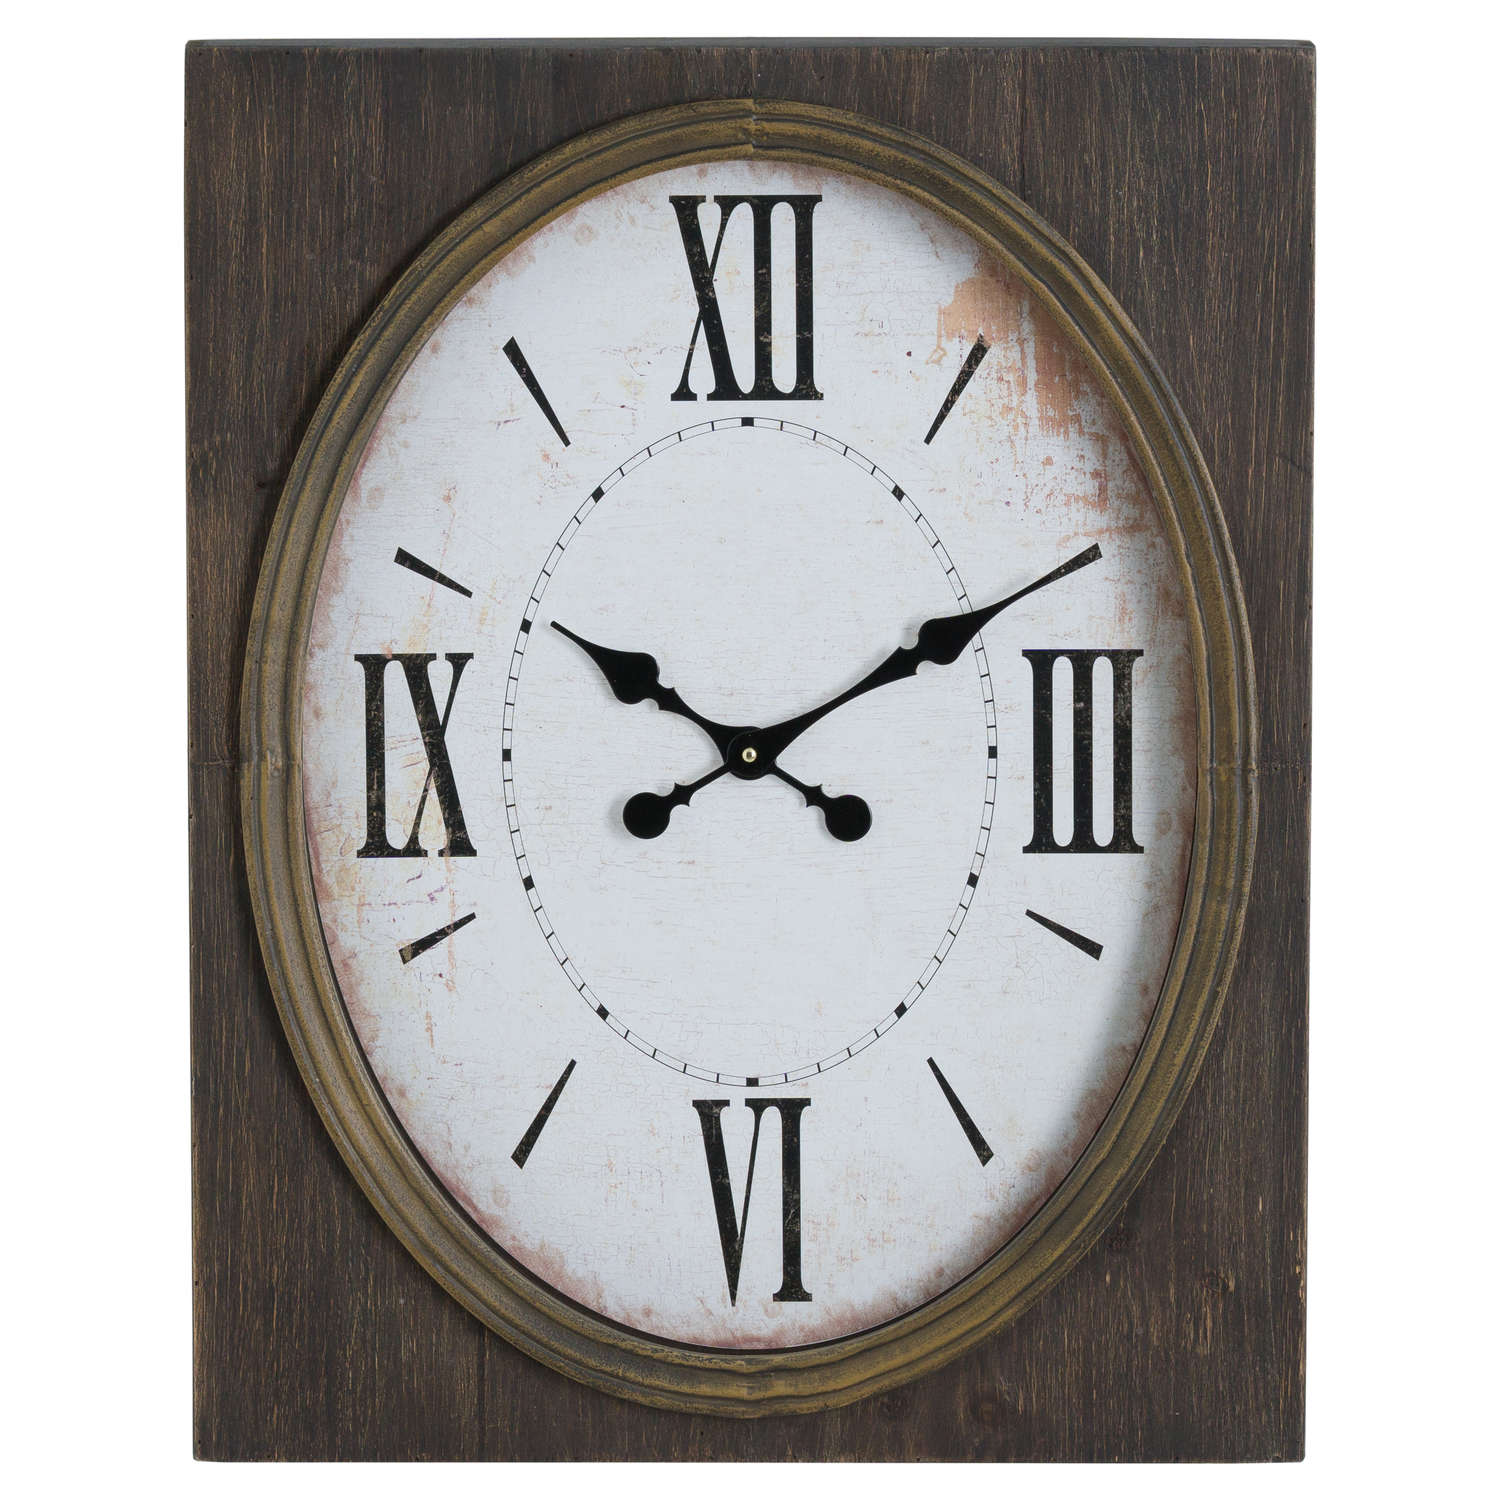 Inset Oval Clock With Roman Numeral